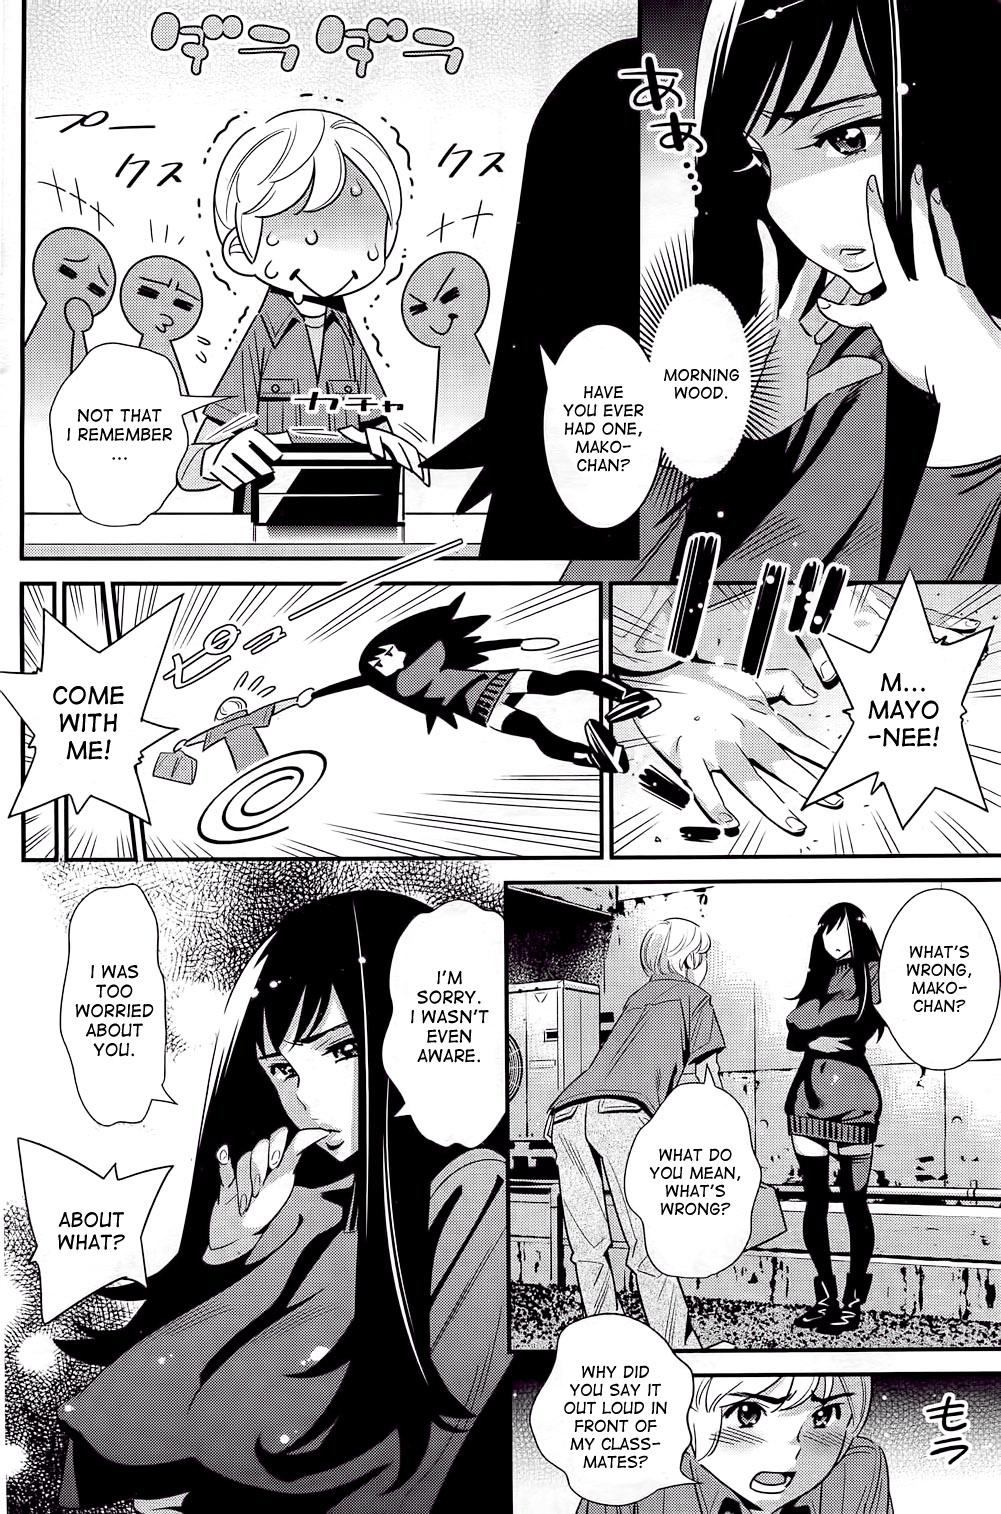 With Boku no Haigorei? | The Ghost Behind My Back? Sloppy Blowjob - Page 6